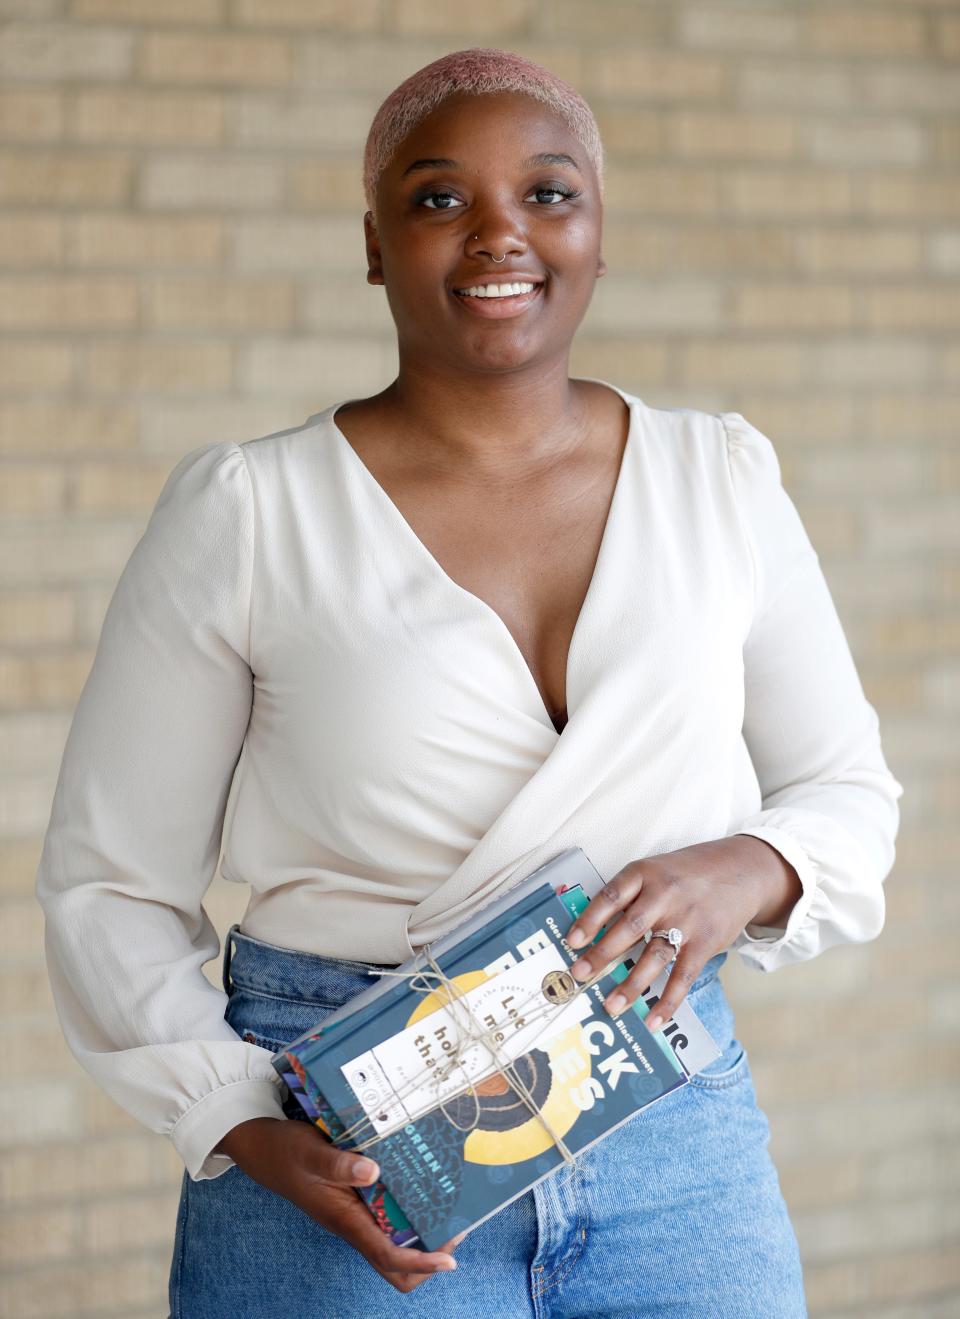 Jasmine Settles holds a stack of books Tuesday, May 24, 2022, outside Crosstown Concourse in Memphis. Settles opened online bookstore Cafe Noir during the pandemic and is now planning to open a brick-and-mortar store and coffee shop.